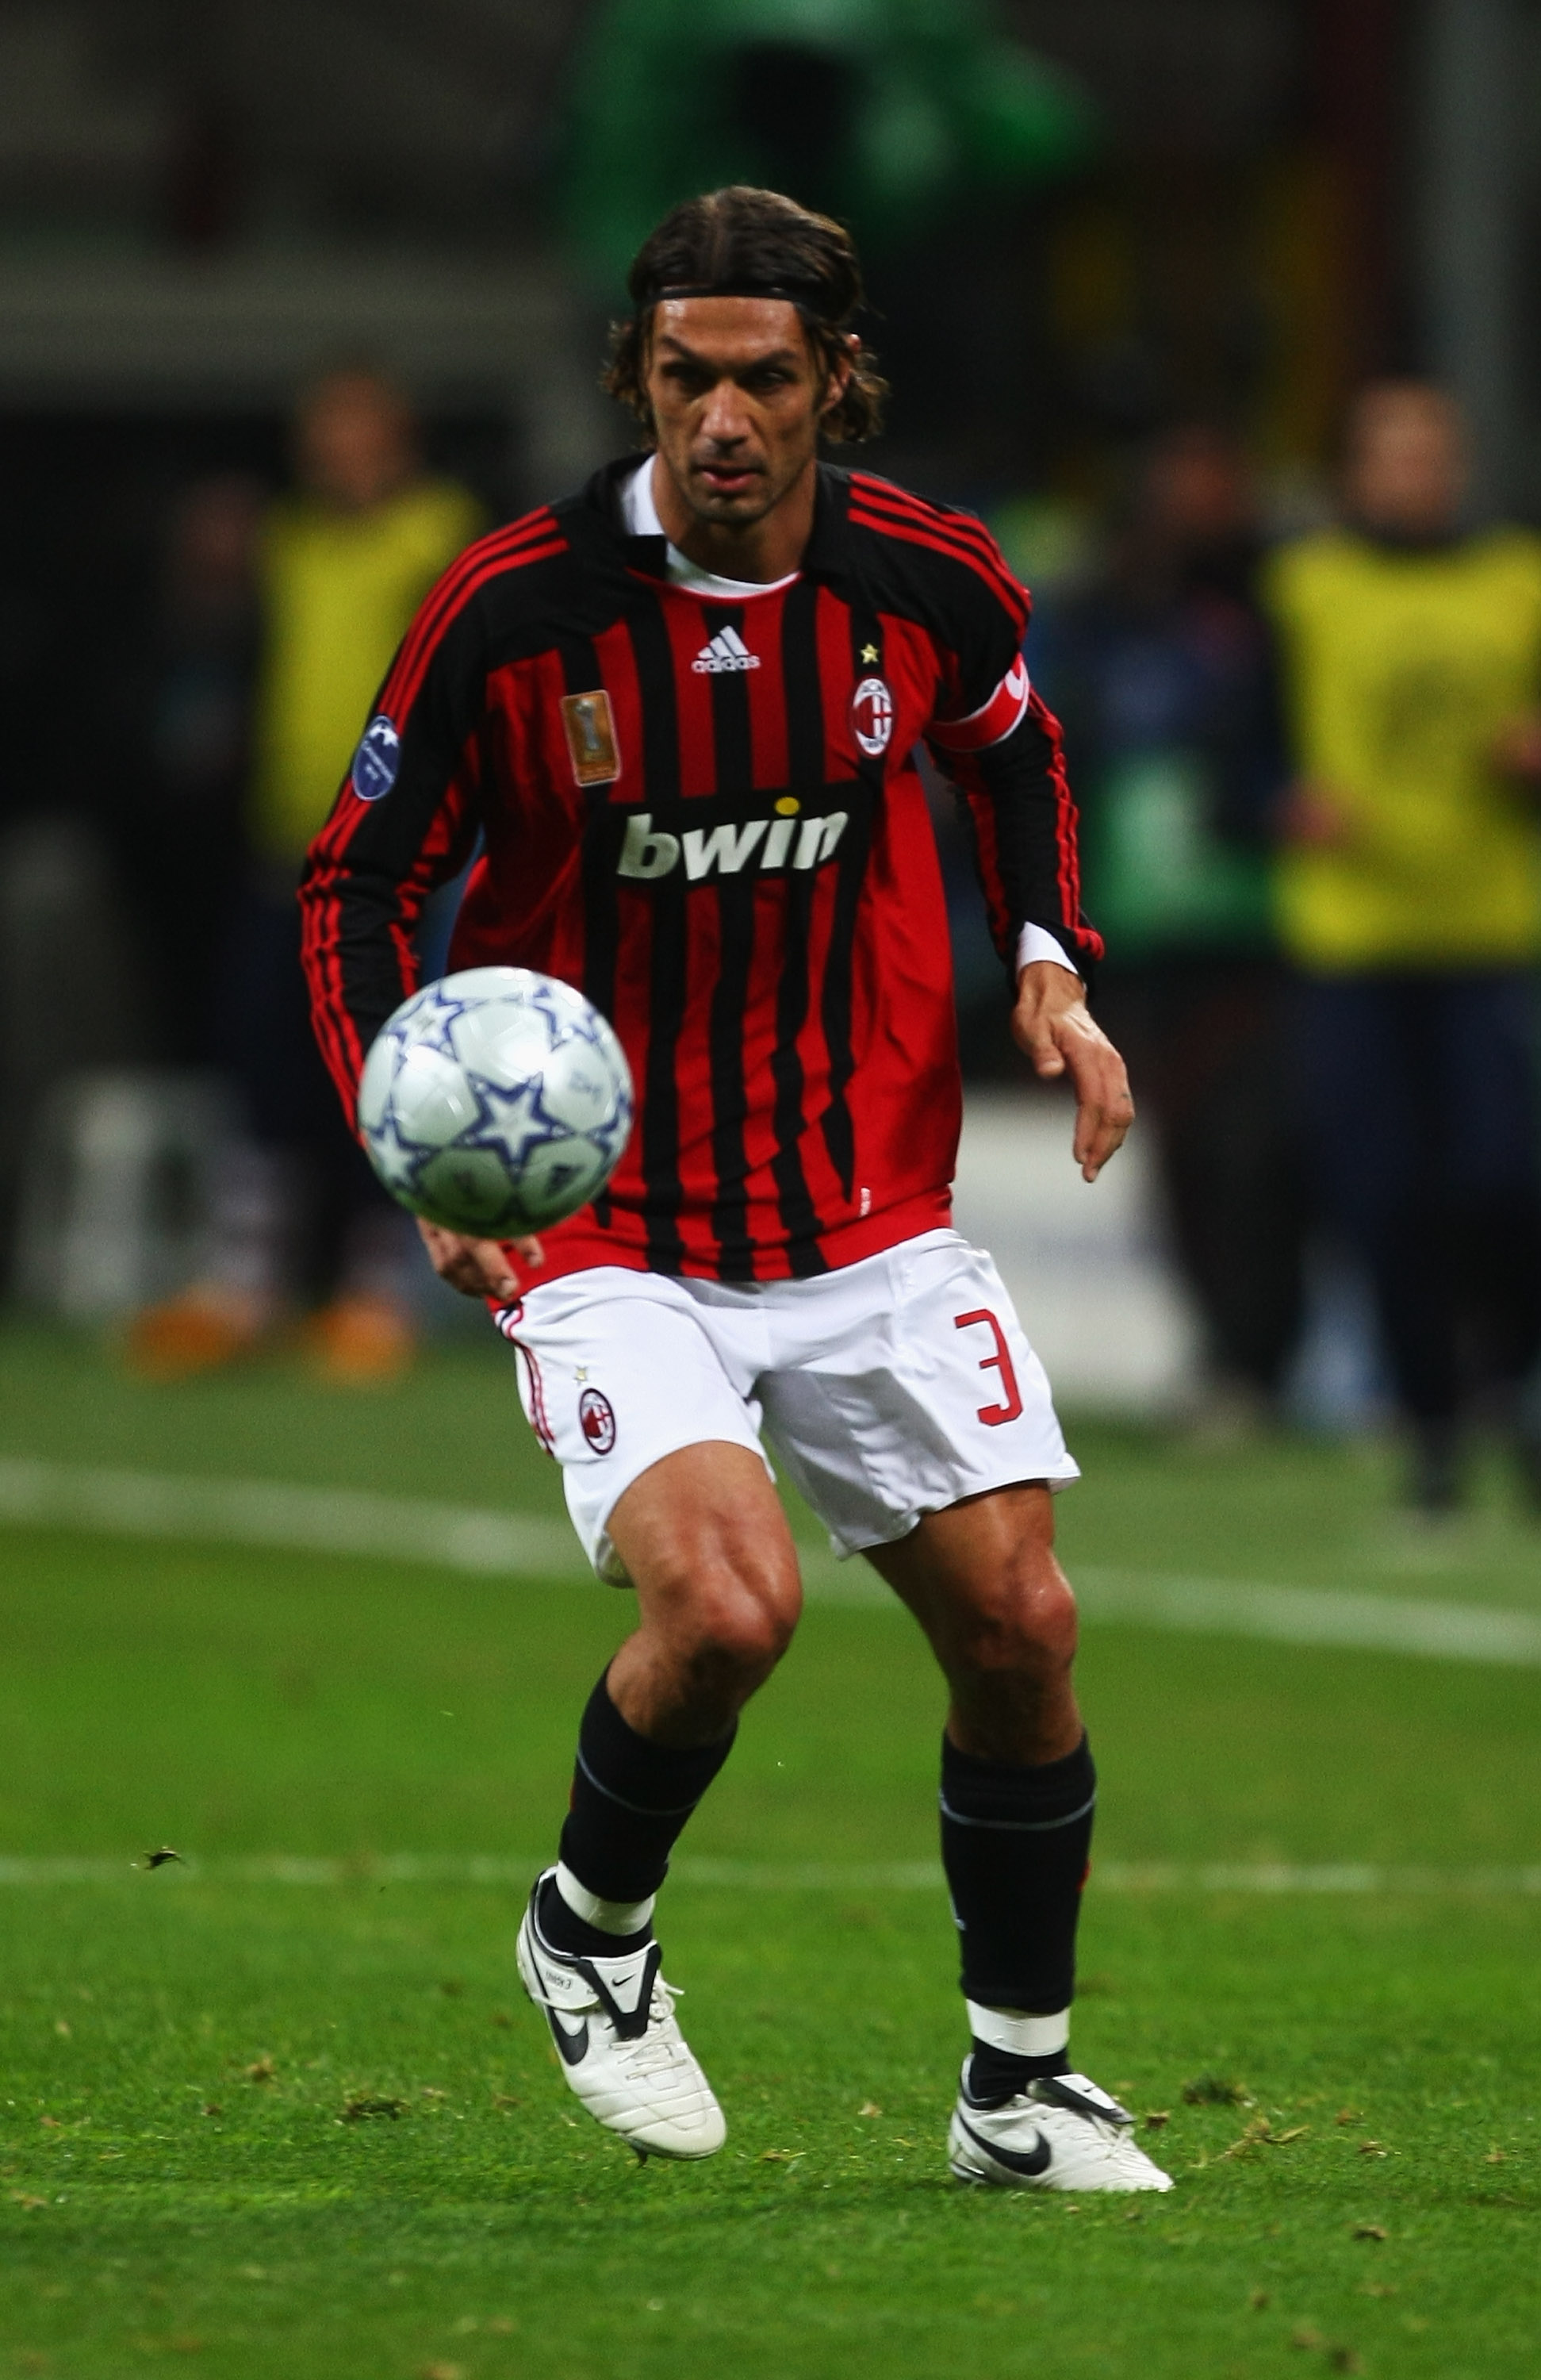 MILAN, ITALY - MARCH 04: Paolo Maldini of AC Milan in action  during the UEFA Champions League 1st knockout round 2nd leg match between AC Milan and Arsenal at the San Siro stadium on March 4, 2008 in Milan, Italy.  (Photo by Mike Hewitt/Getty Images)